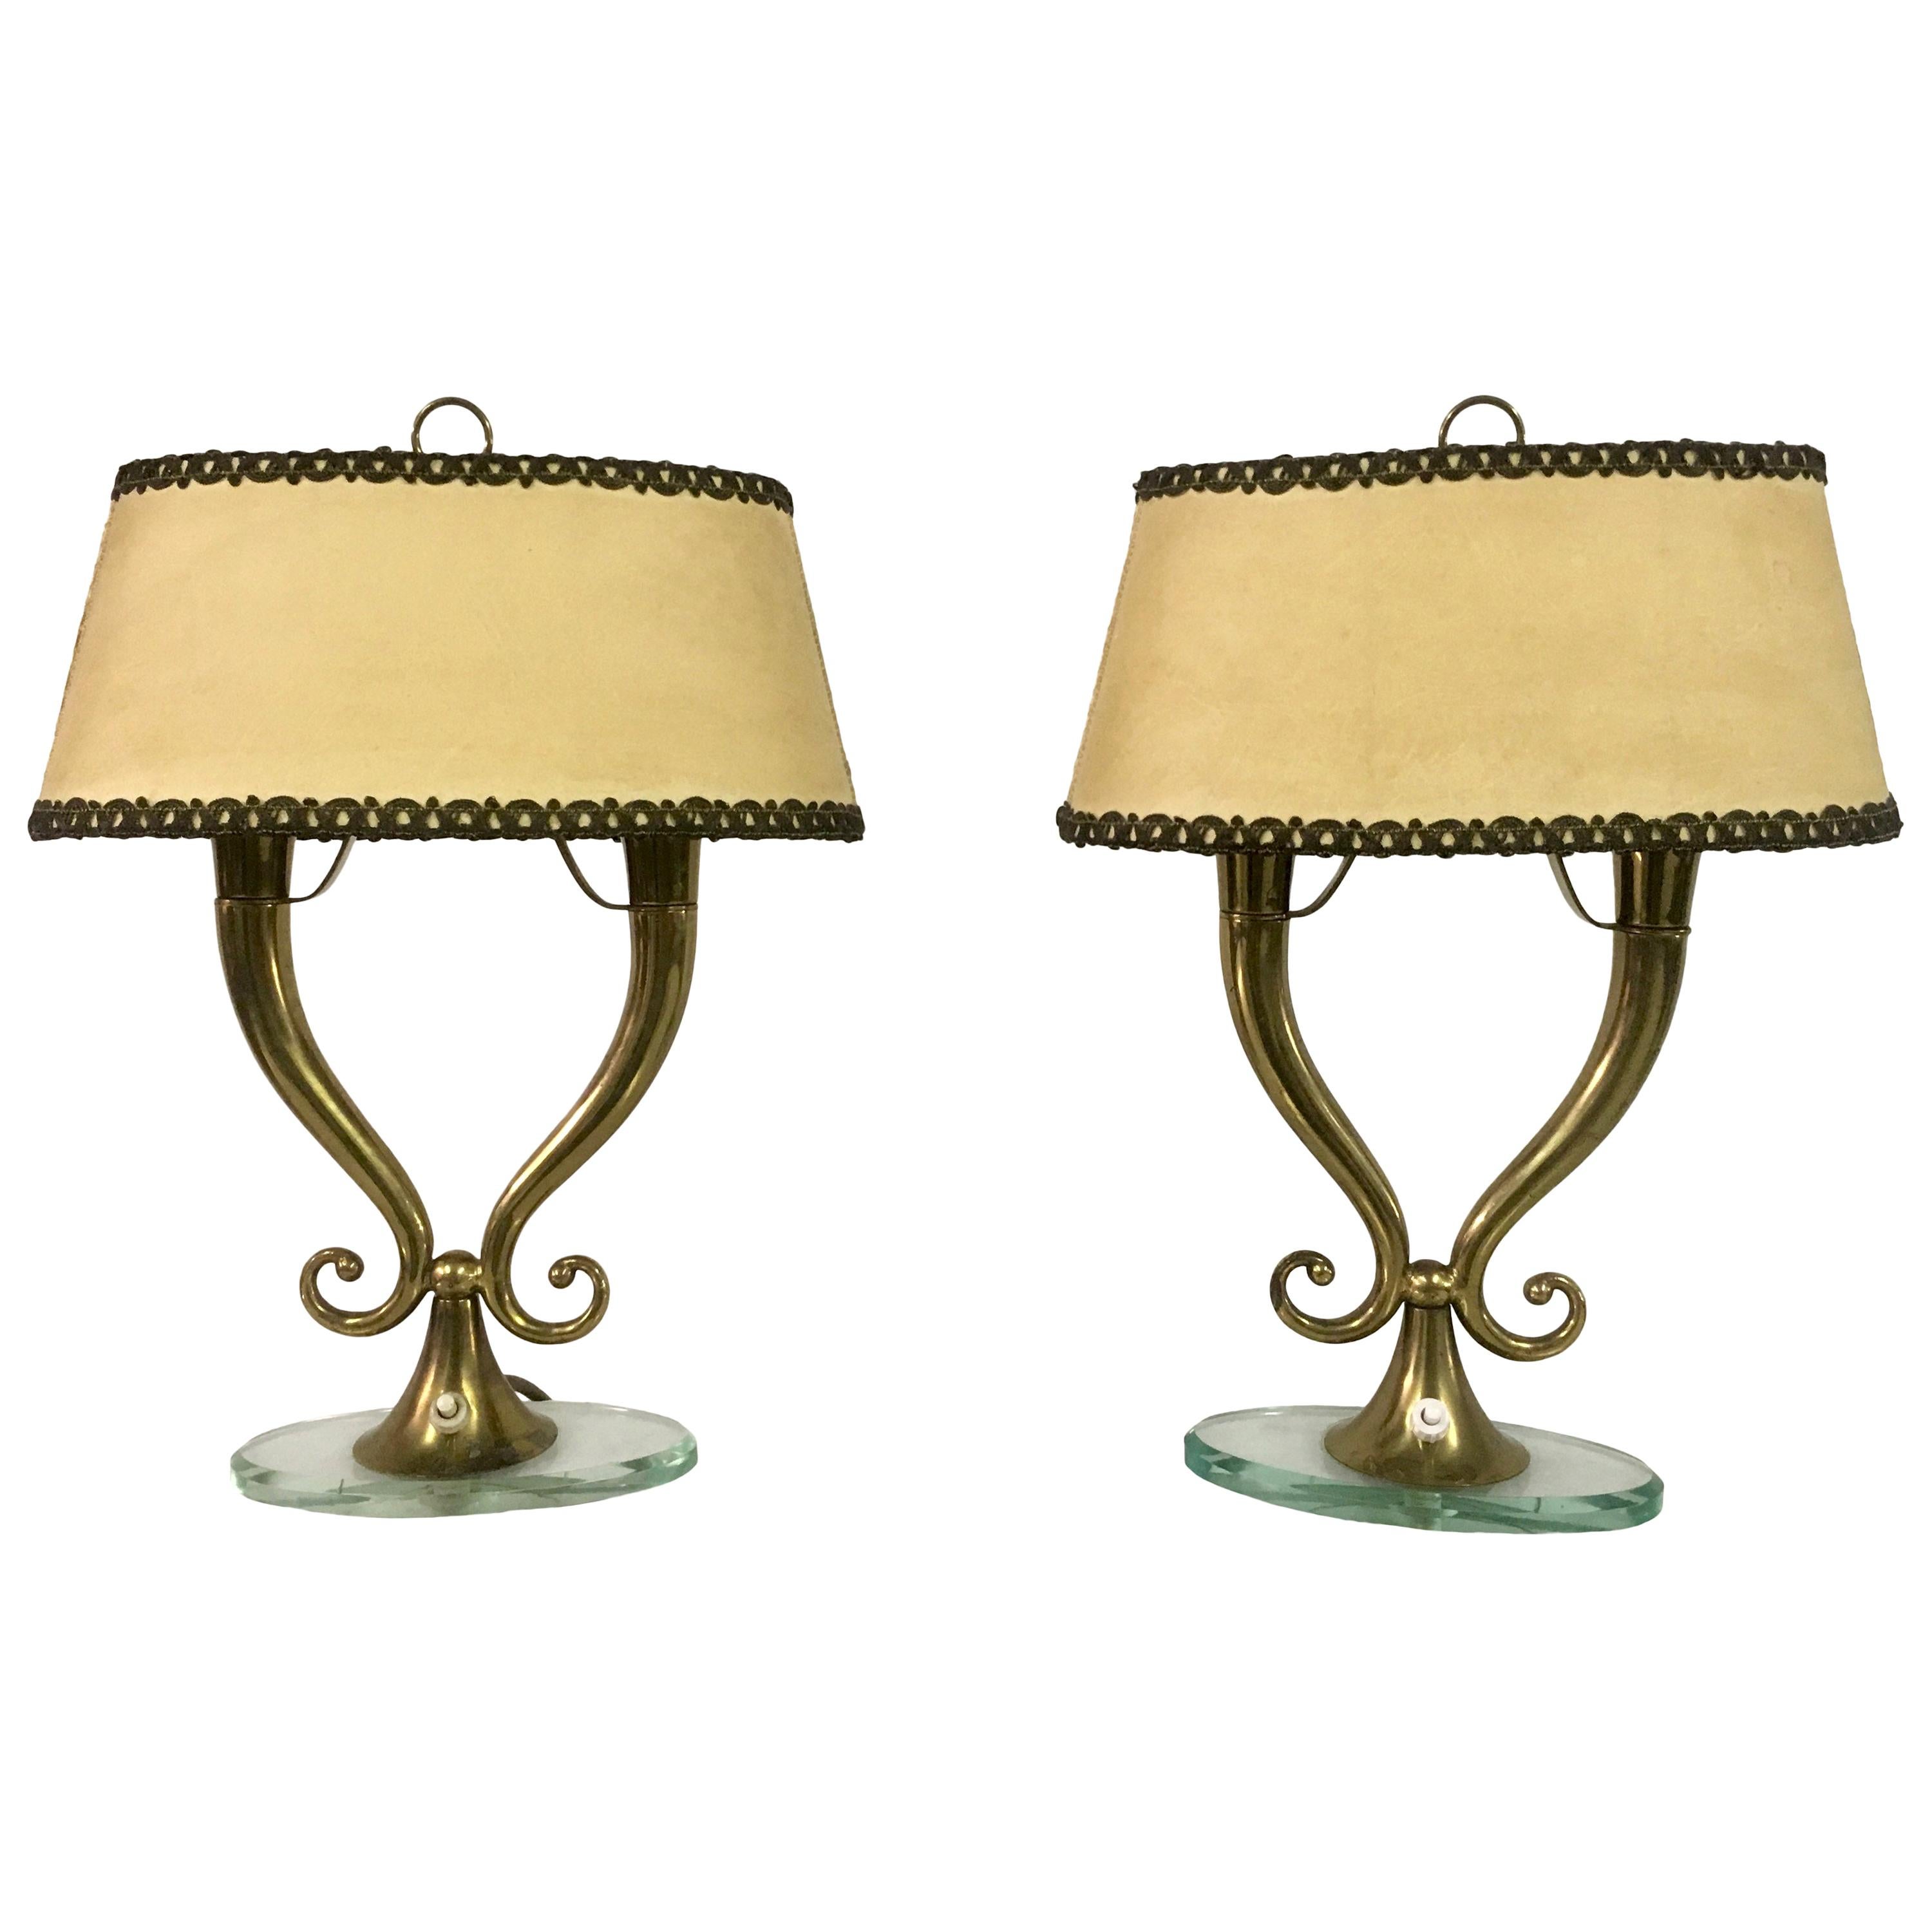 Vintage Pair of 1950s Italian Brass and Glass Table Lamps